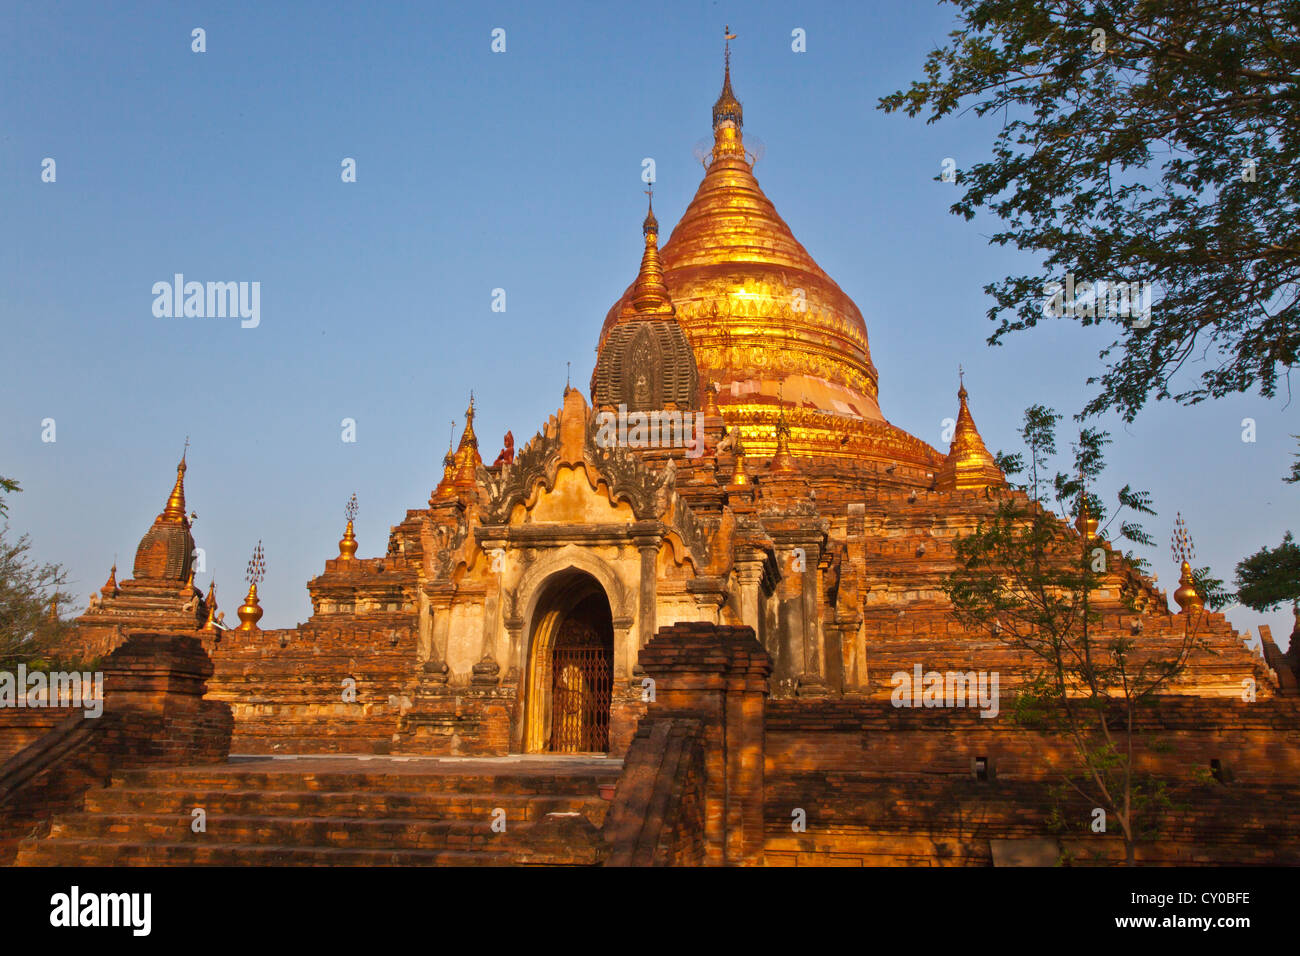 The gilded bell shaped DHAMMAYAZIKA PAGODA completed in 1196 AD by Narapatisithu - BAGAN, MYANMAR Stock Photo